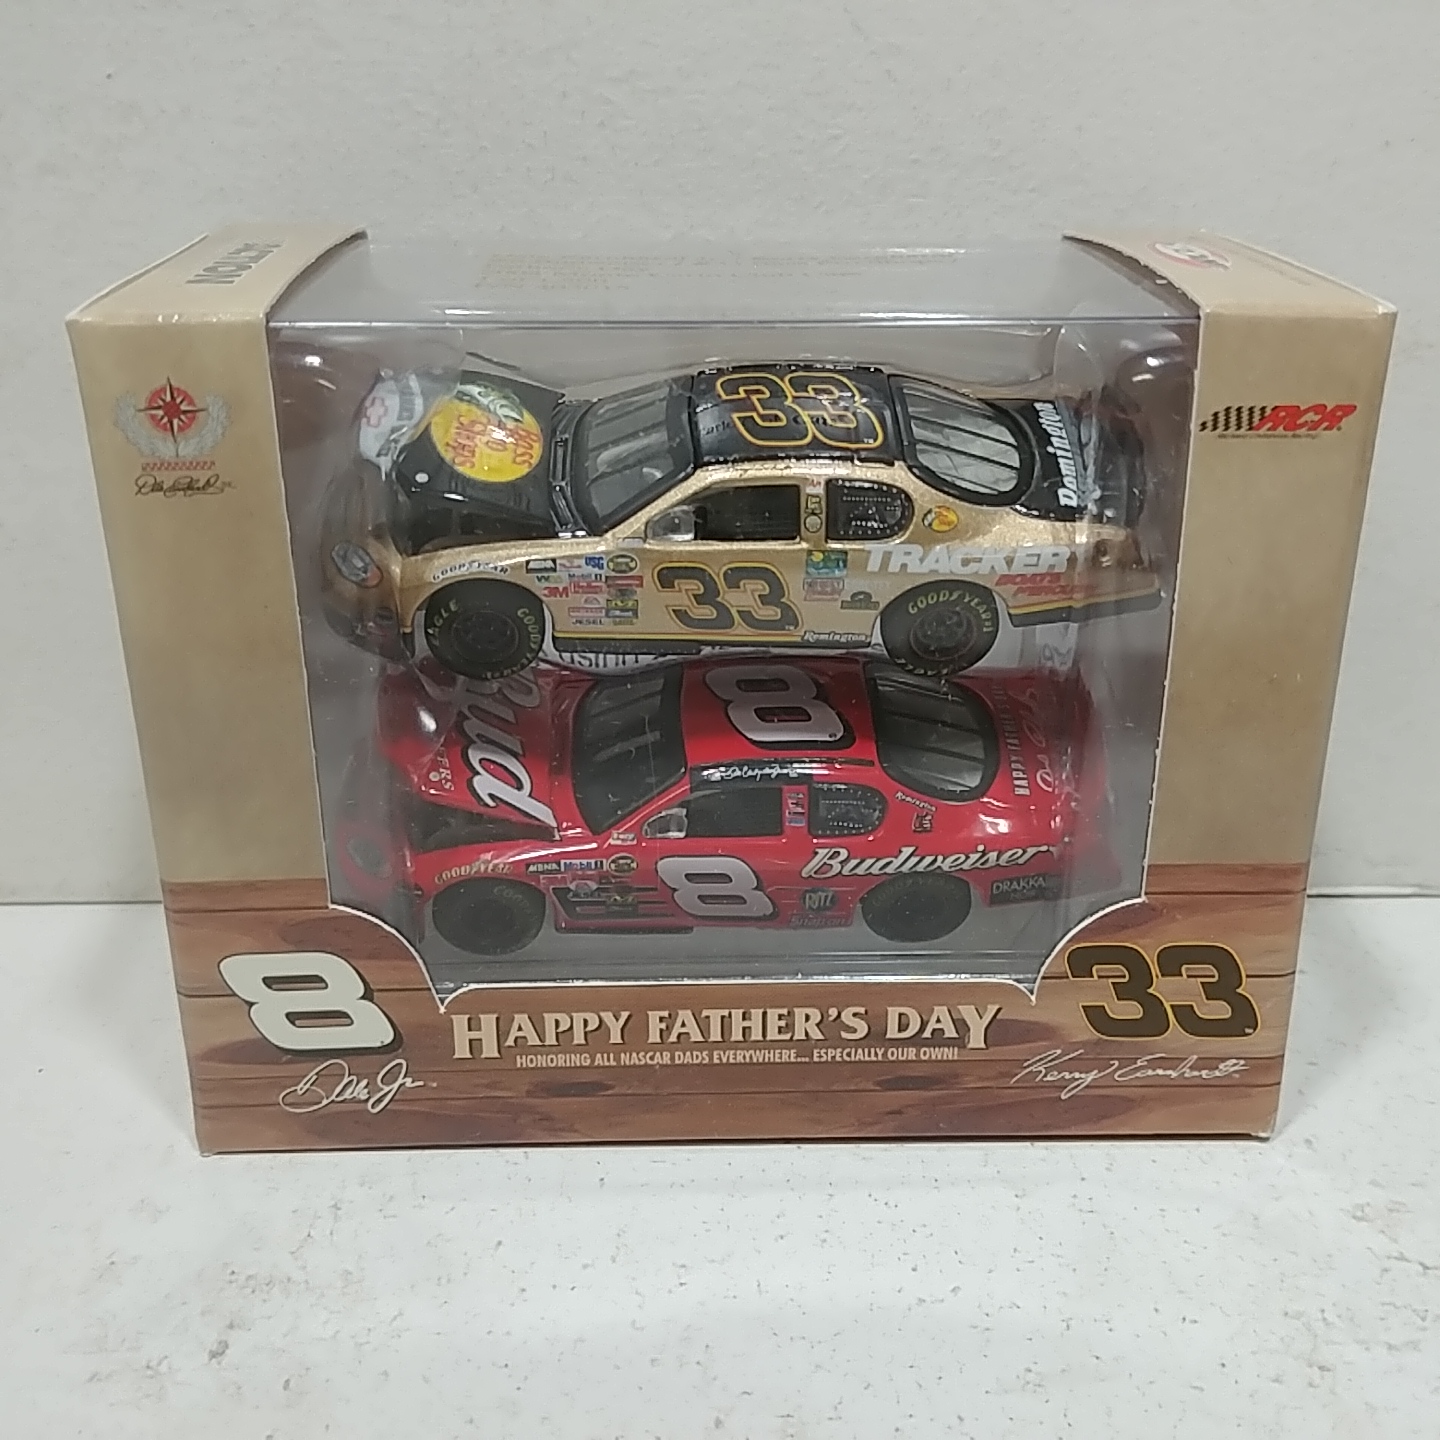 2004 Dale Jr and Kerry Earnhardt 1/64th Budweiser and Bass Pro Shops "Fathers Day" hood open Monte Carlos